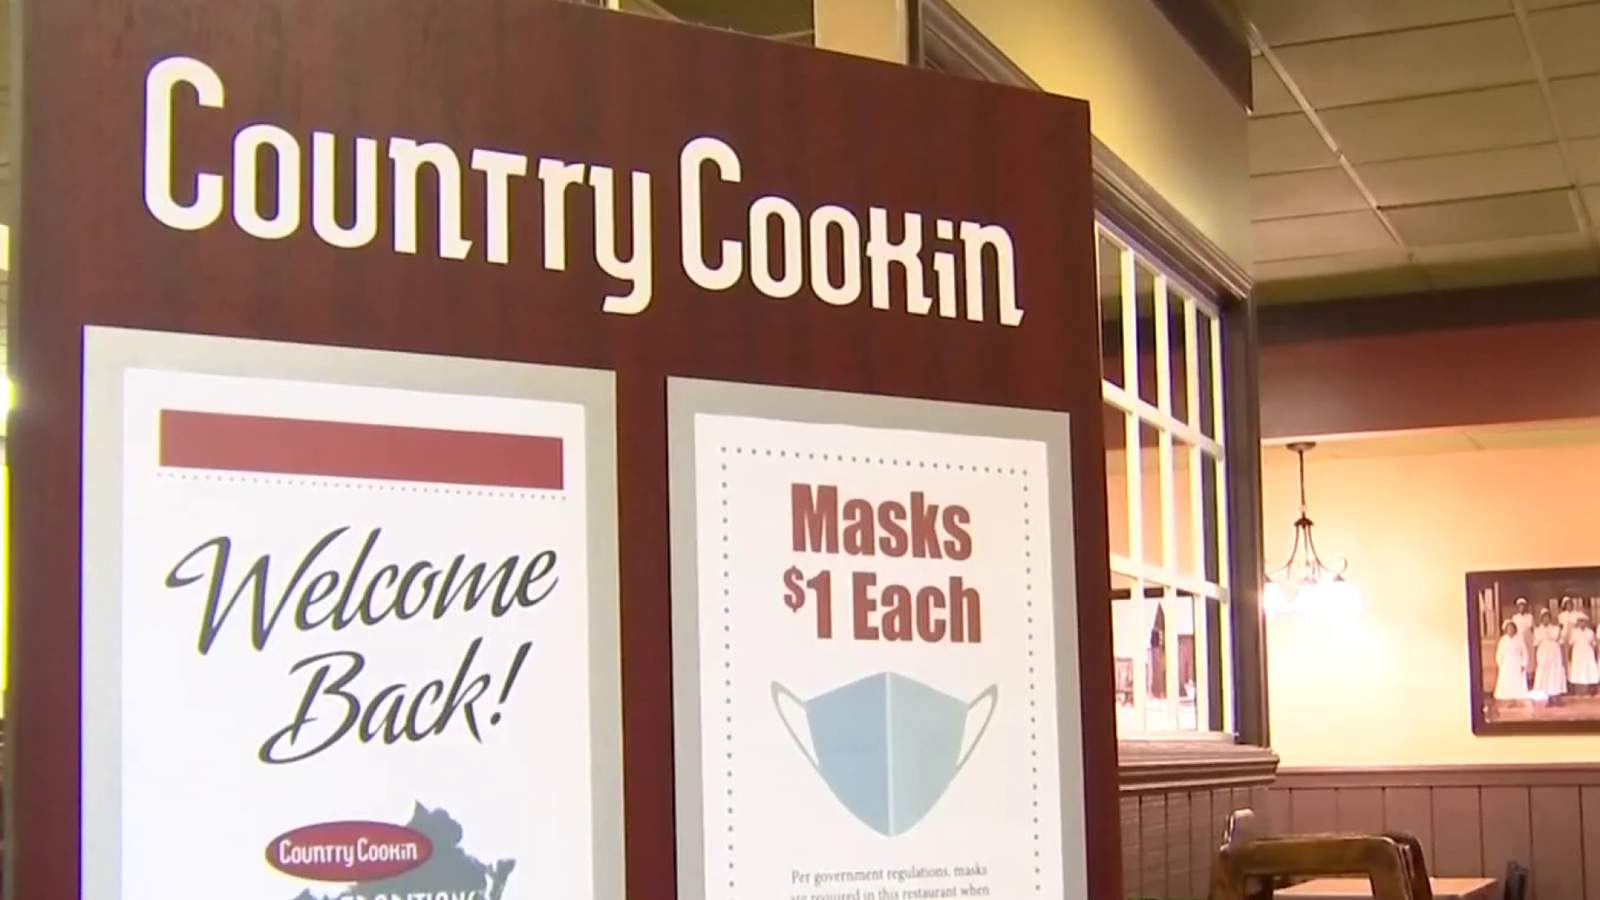 Country Cookin is permanently closing all its locations after Sunday